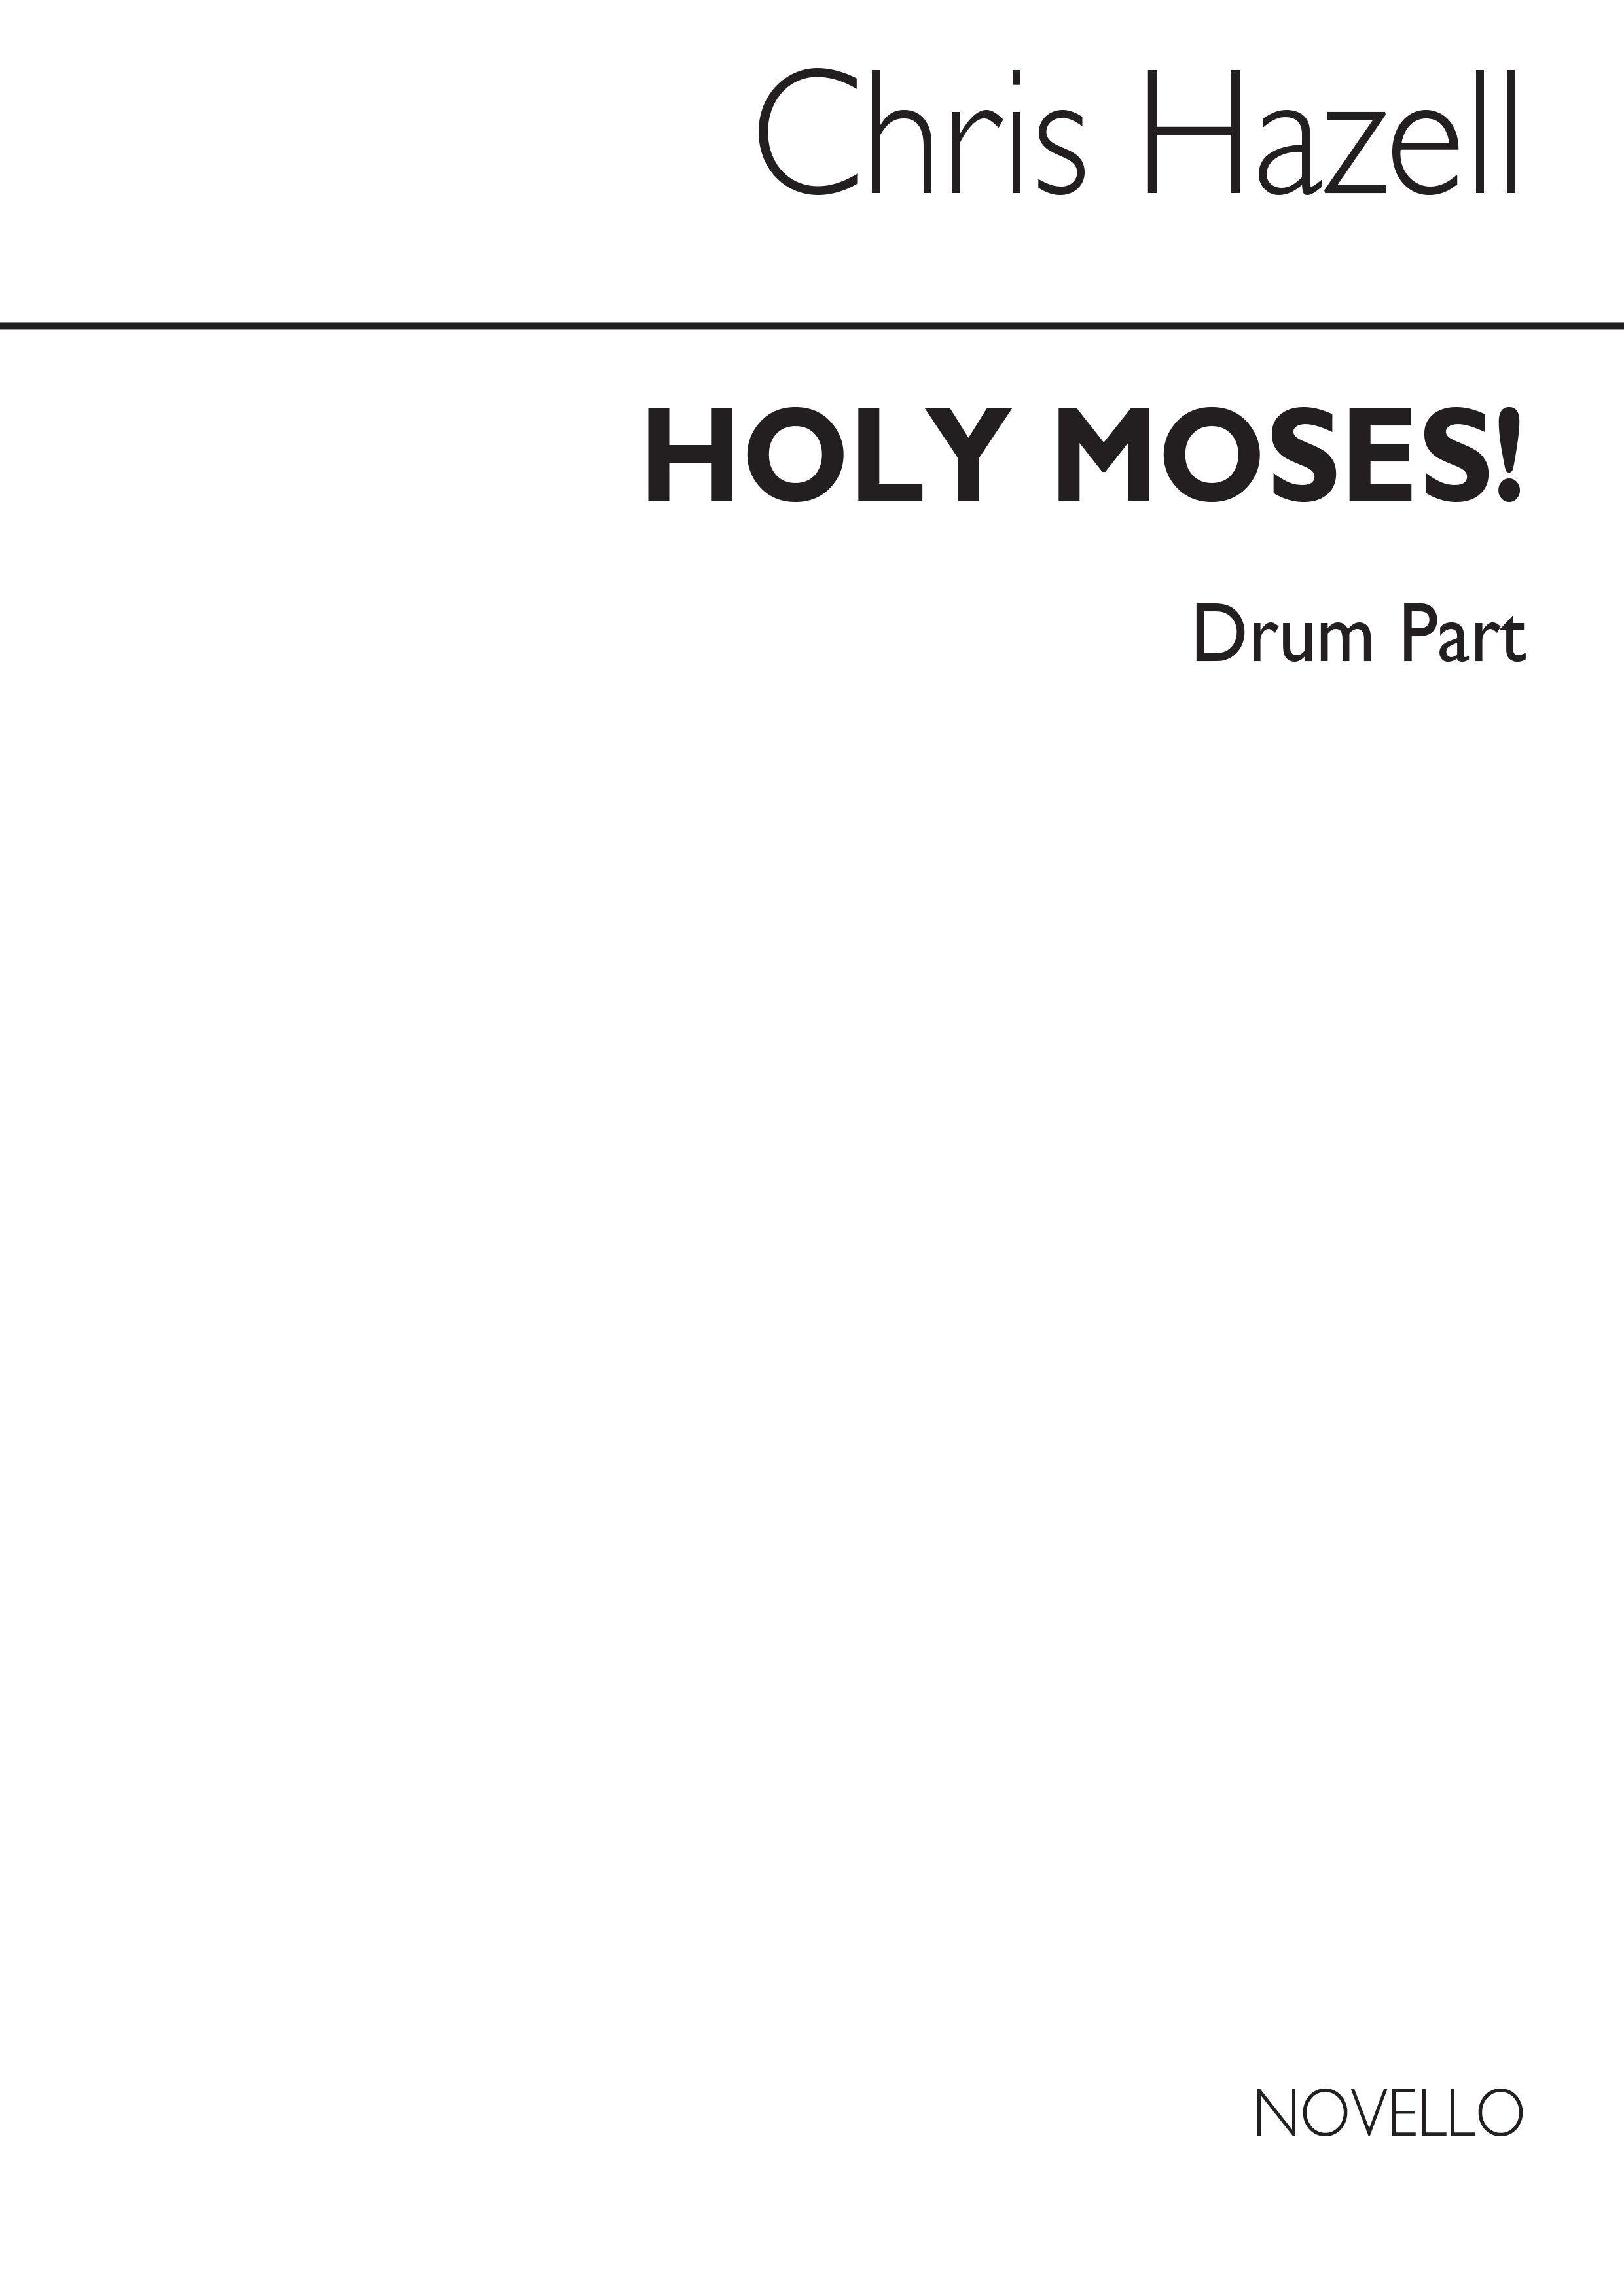 Chris Hazell: Holy Moses (Drum Part)